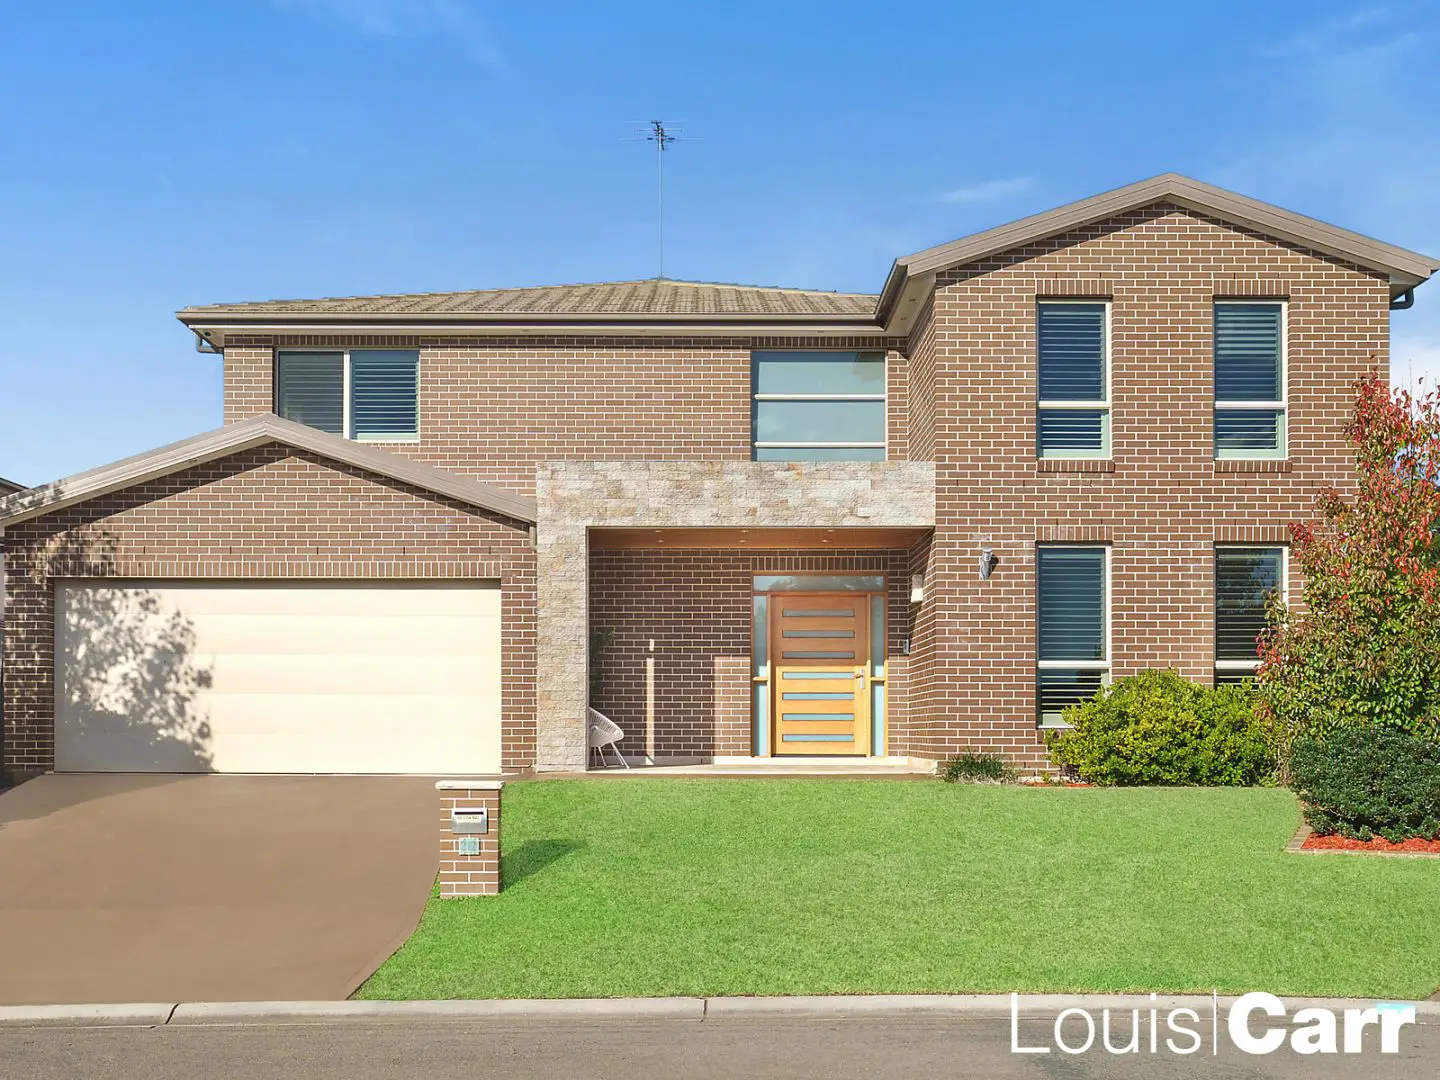 Photo #1: 22 Blundell Circuit, Kellyville - Sold by Louis Carr Real Estate